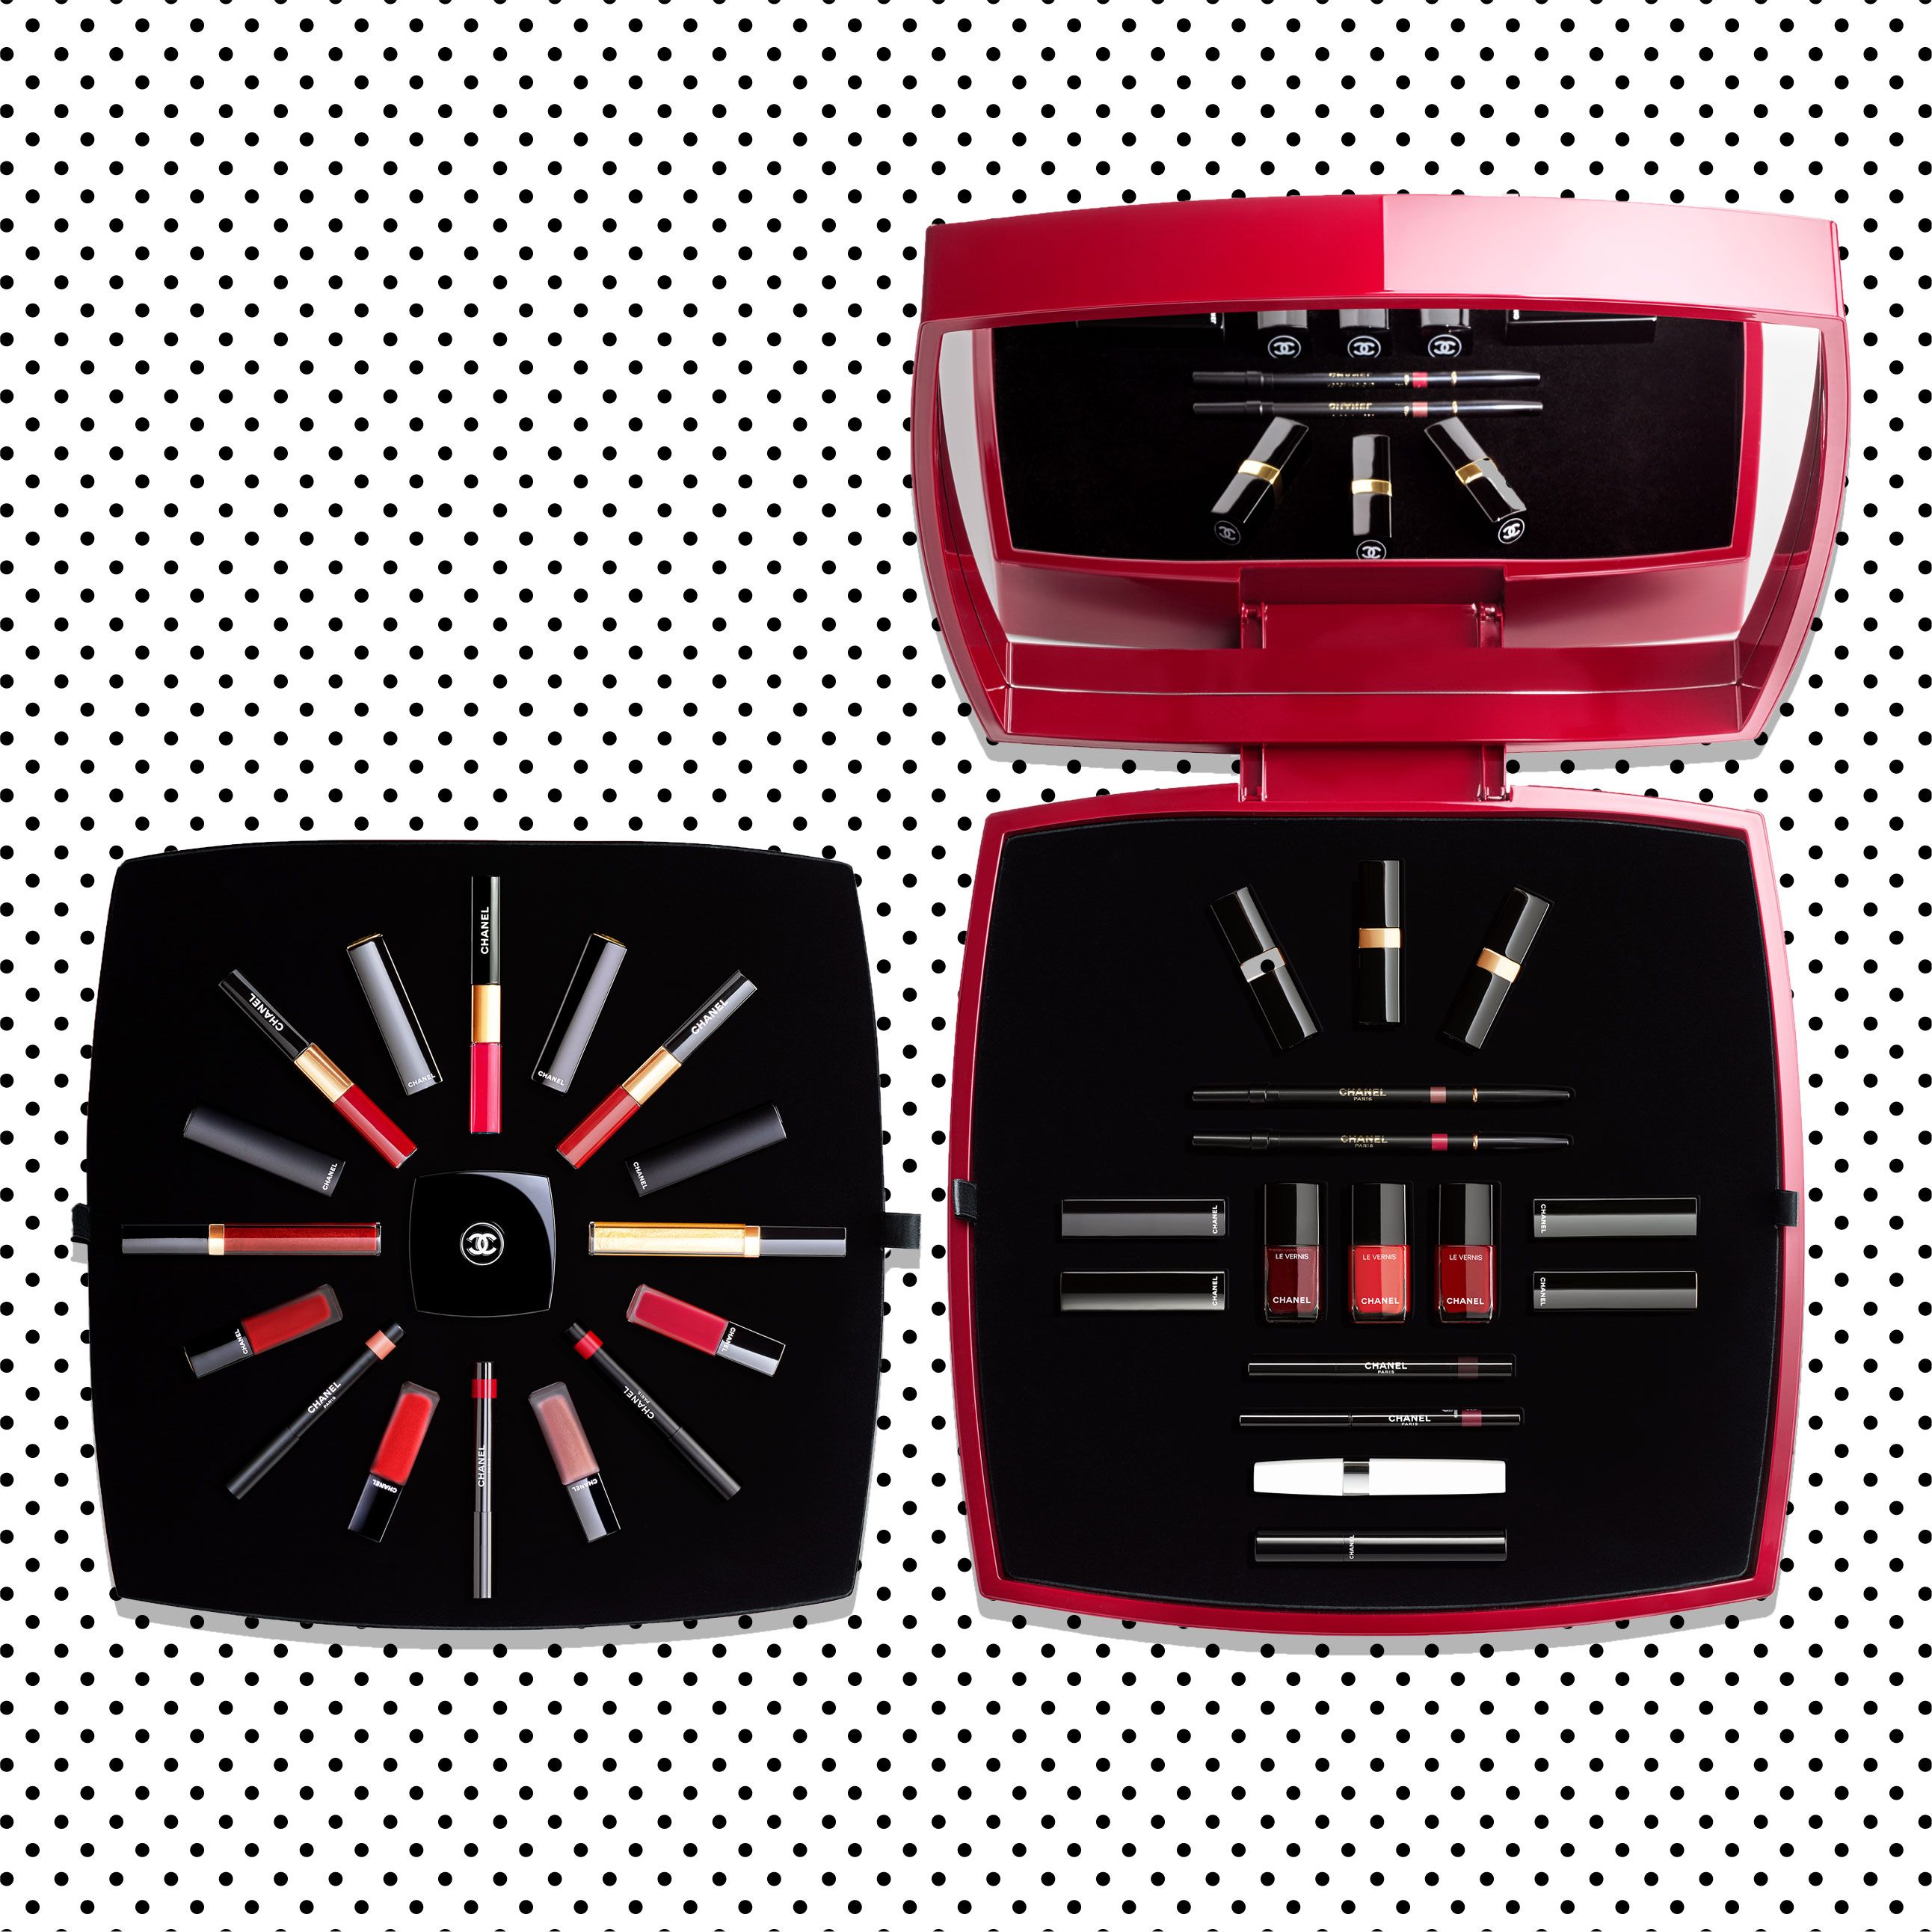 Paint the town red at the Le Rouge Chanel pop-up boutique in